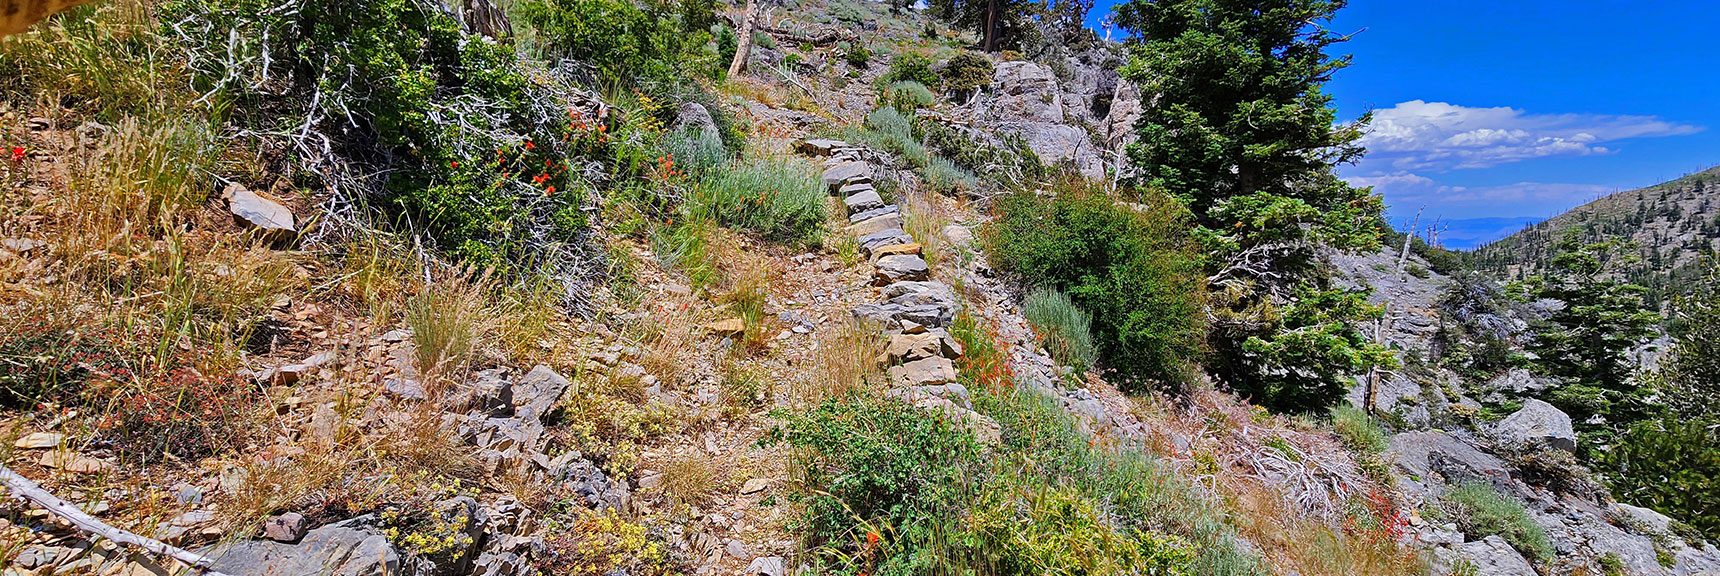 The Trail is Beginning to Get Overgrown Here, But Still Obvious. | Fletcher Canyon Trailhead to Harris Mountain Summit to Griffith Peak Summit Circuit Adventure | Mt. Charleston Wilderness, Nevada